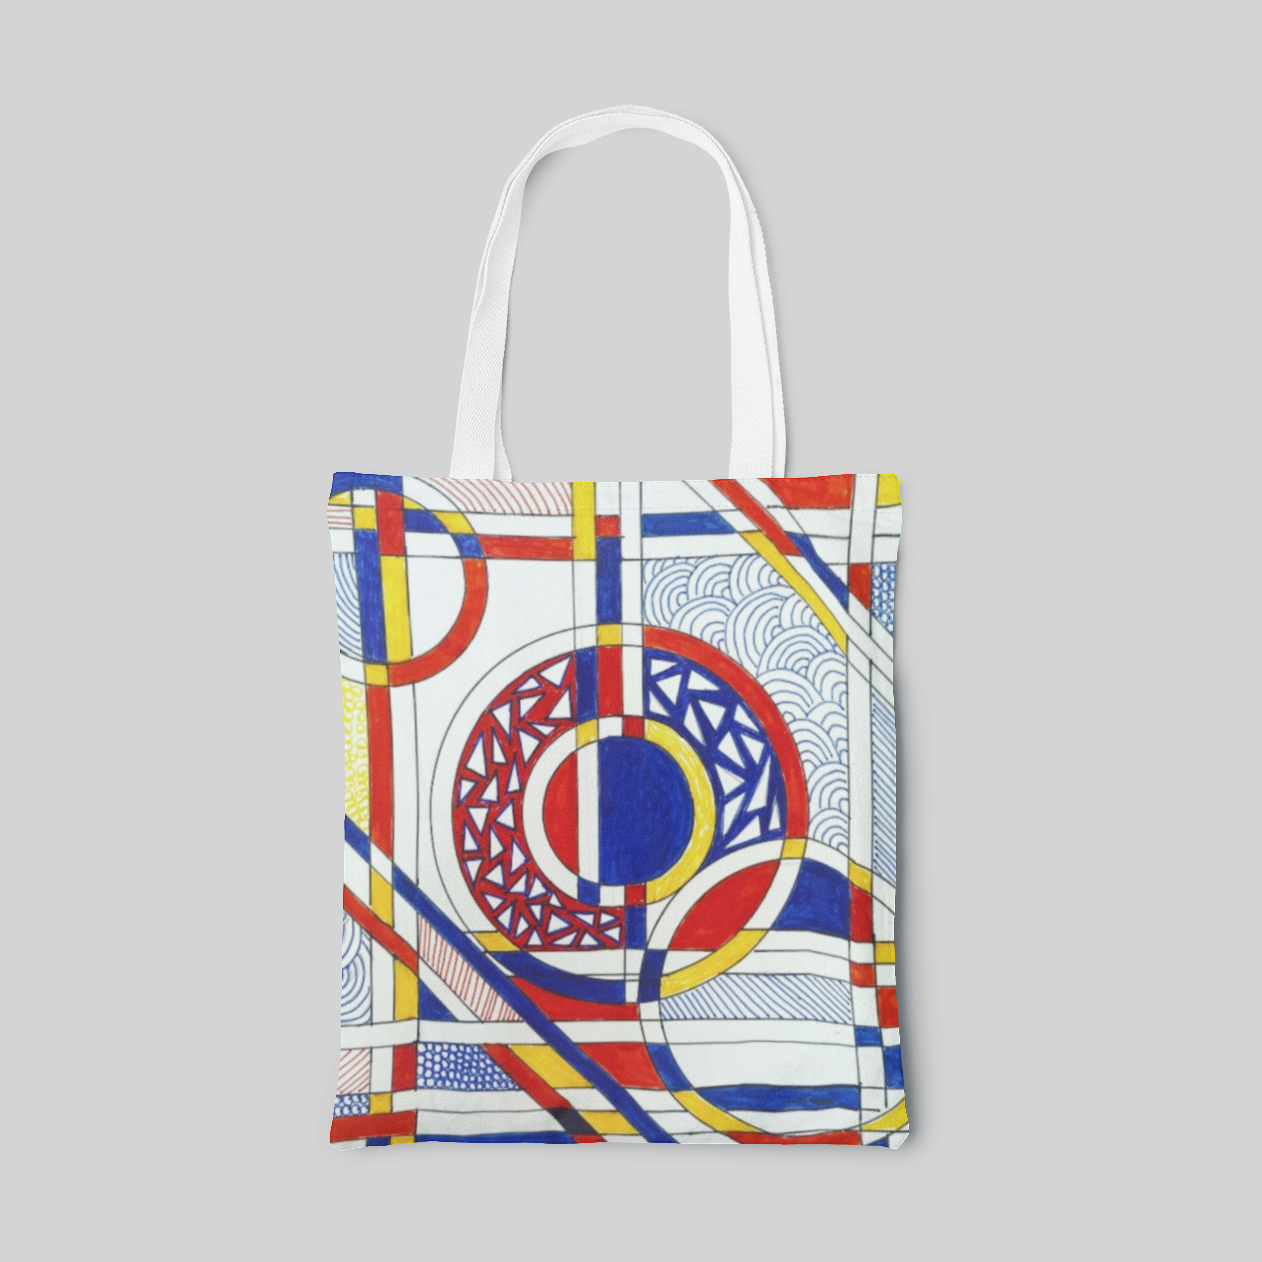 abstract designed tote bag with black straight lines and circles, filled with red, yellow and blur colours and patterns, front side